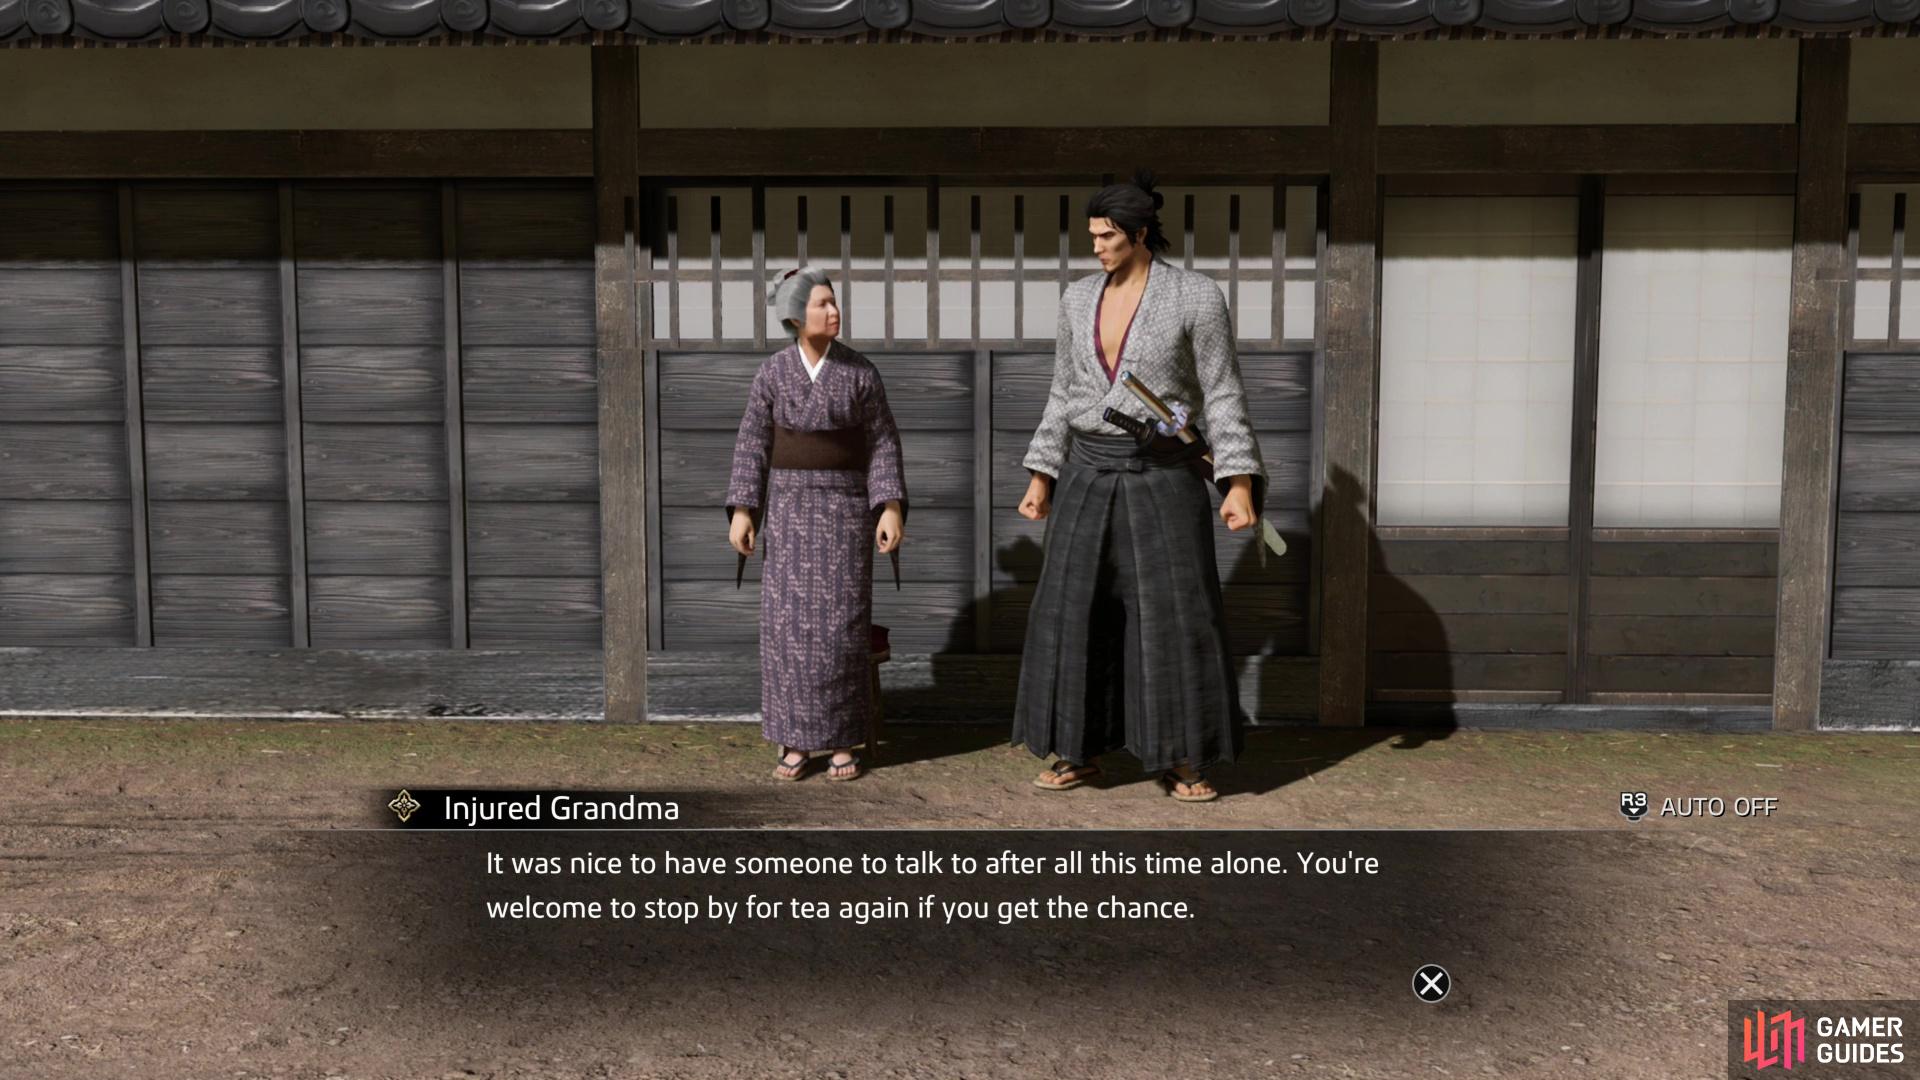 Ryoma will take her back to her house and chat with her, forming a bond and completing this Substory.